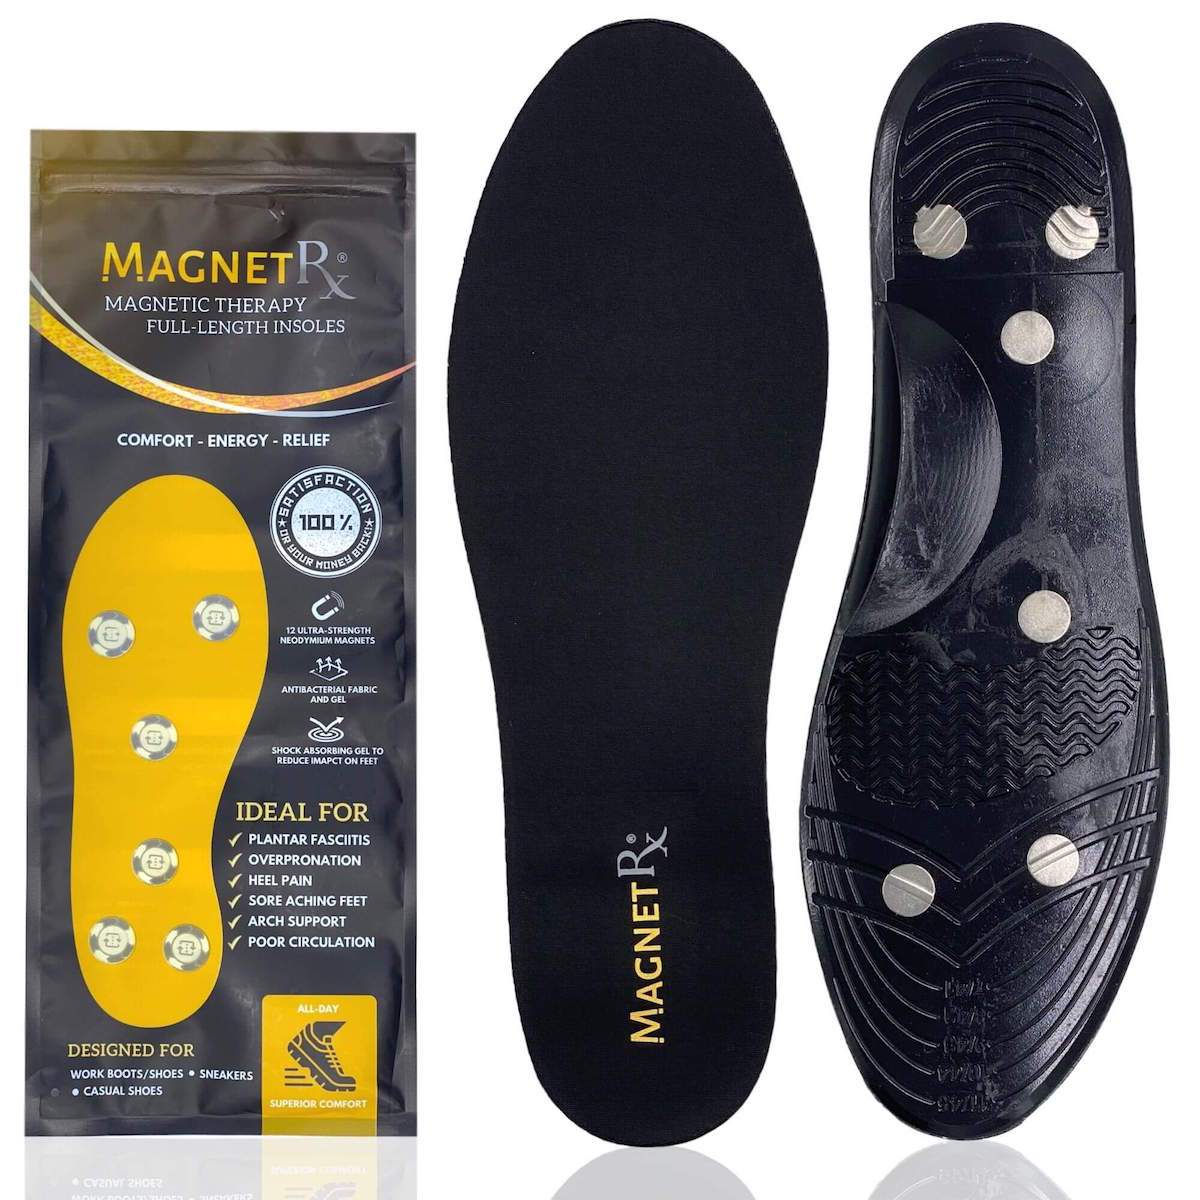 Magnetic Foot Shoe Inserts with Magnetic Therapy